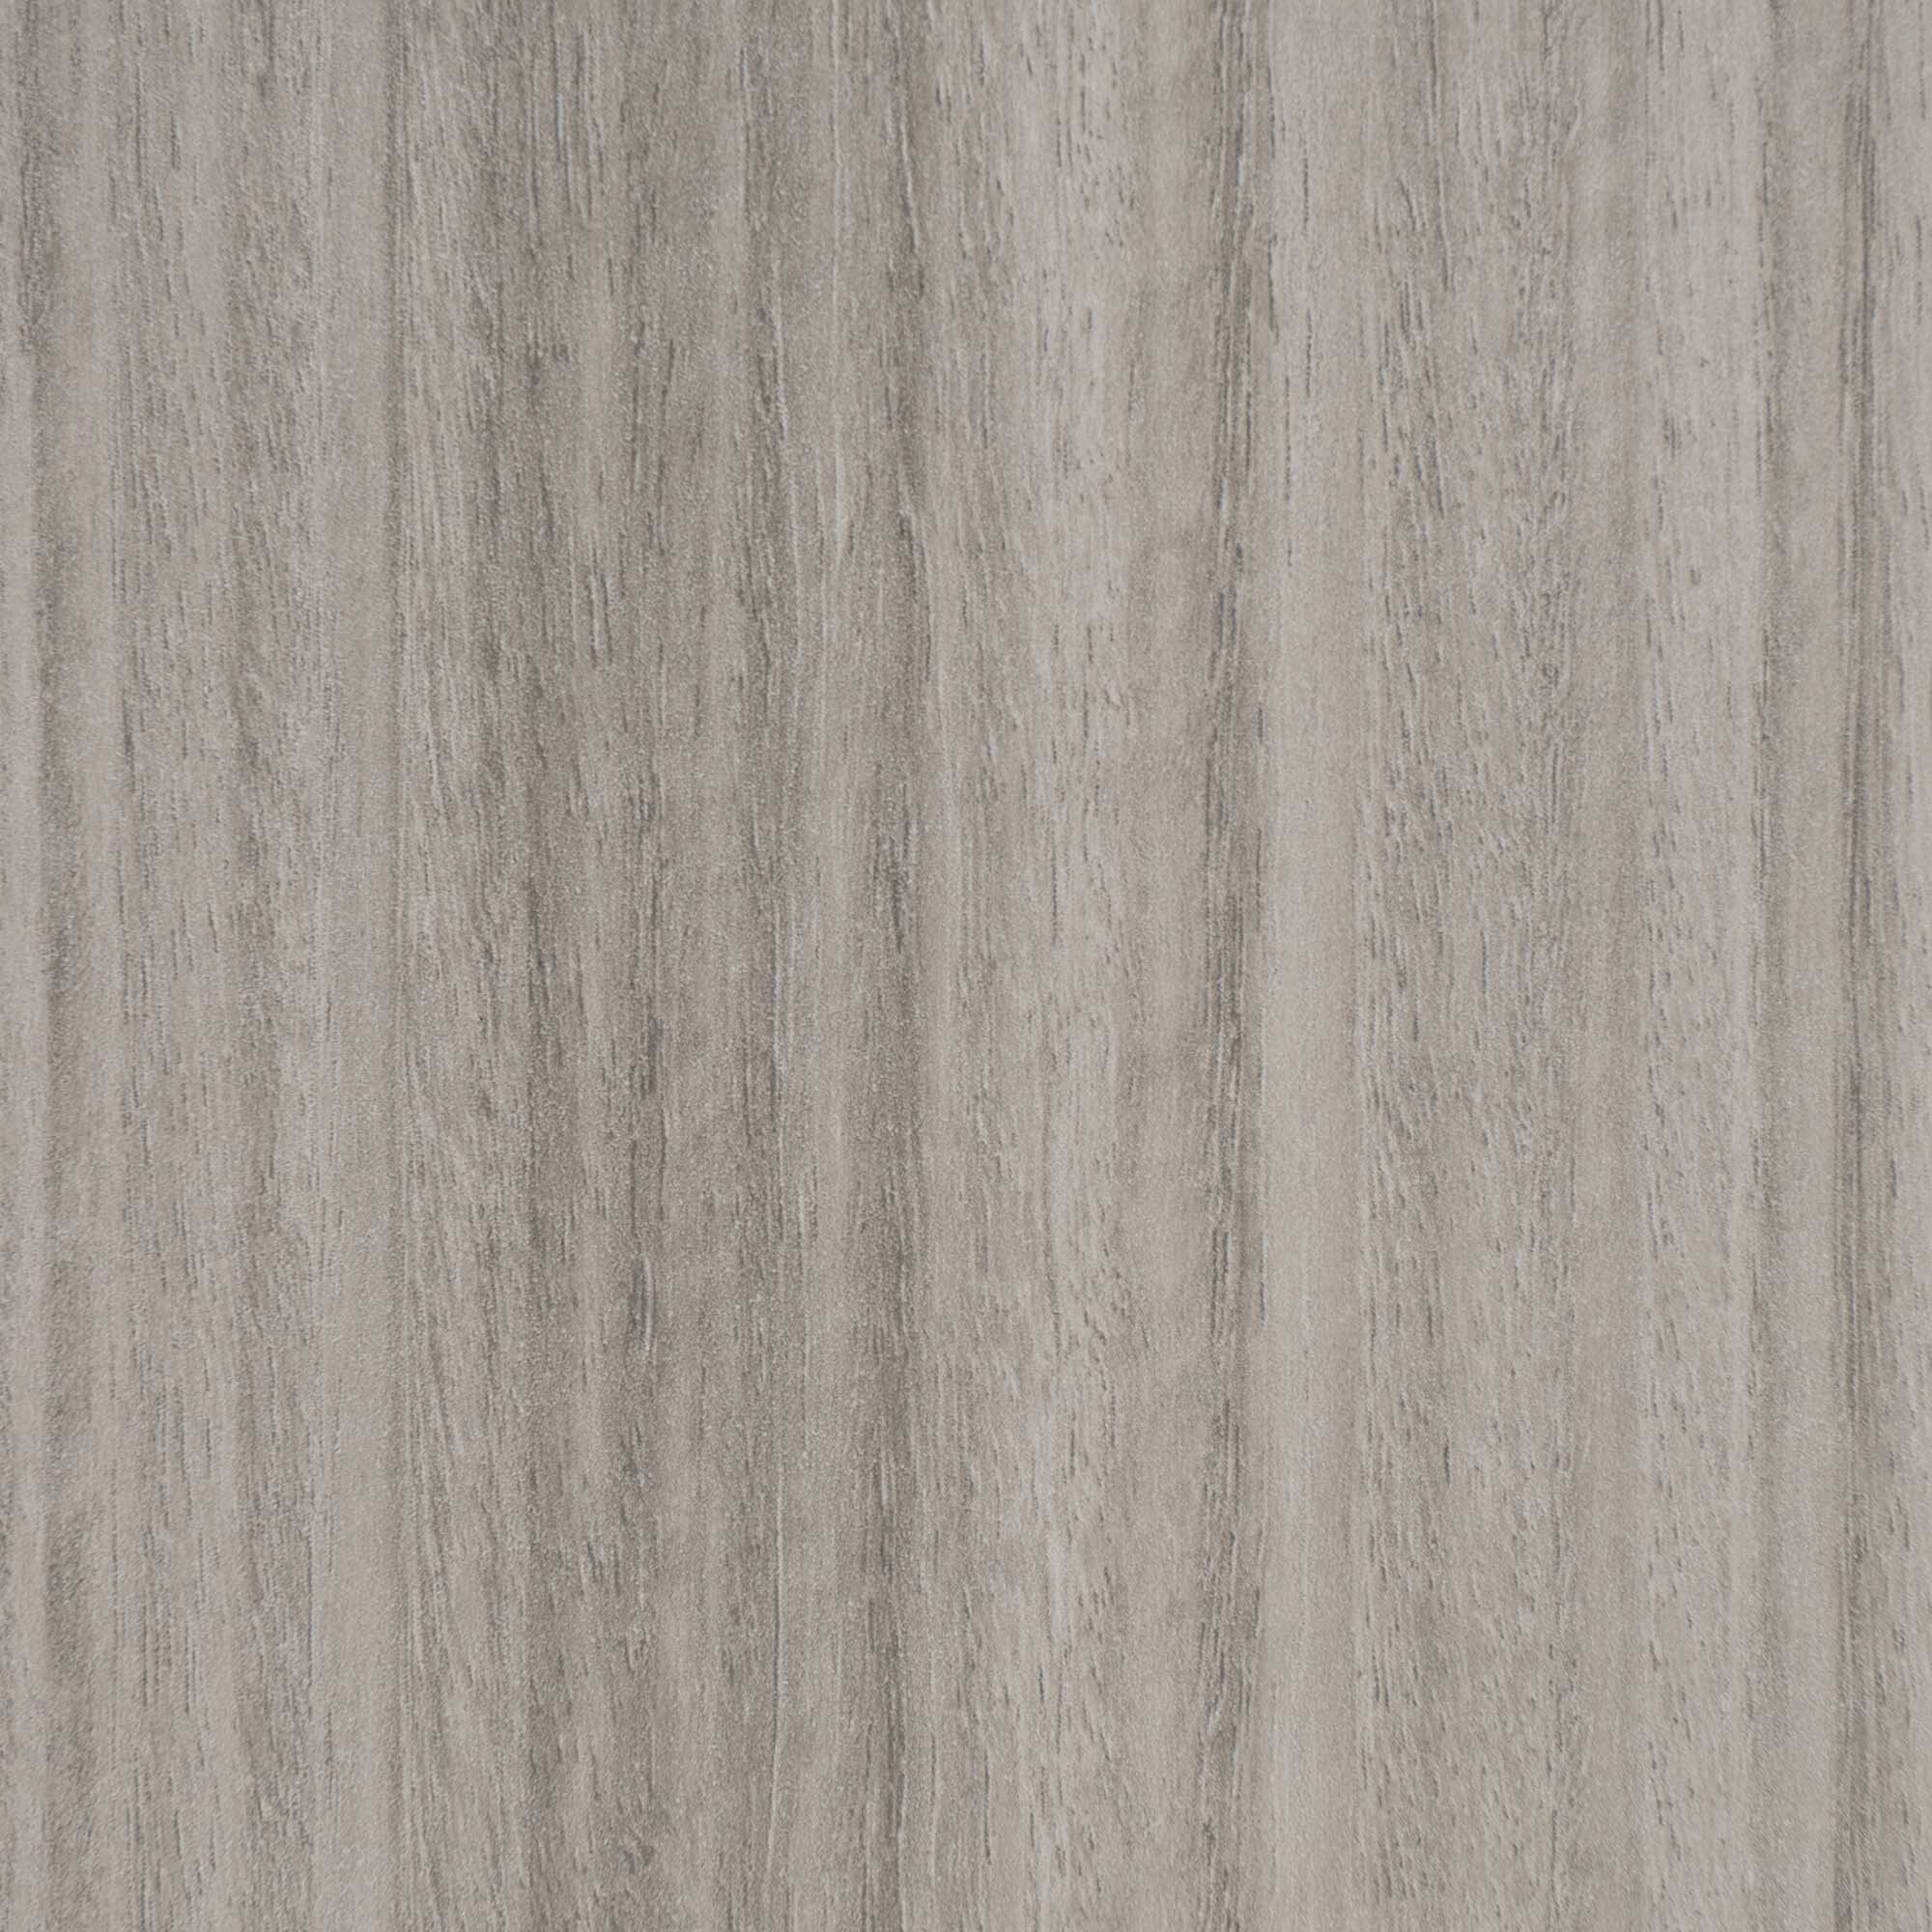 Mod Cabinetry Euro Line Woodline 1 Texture